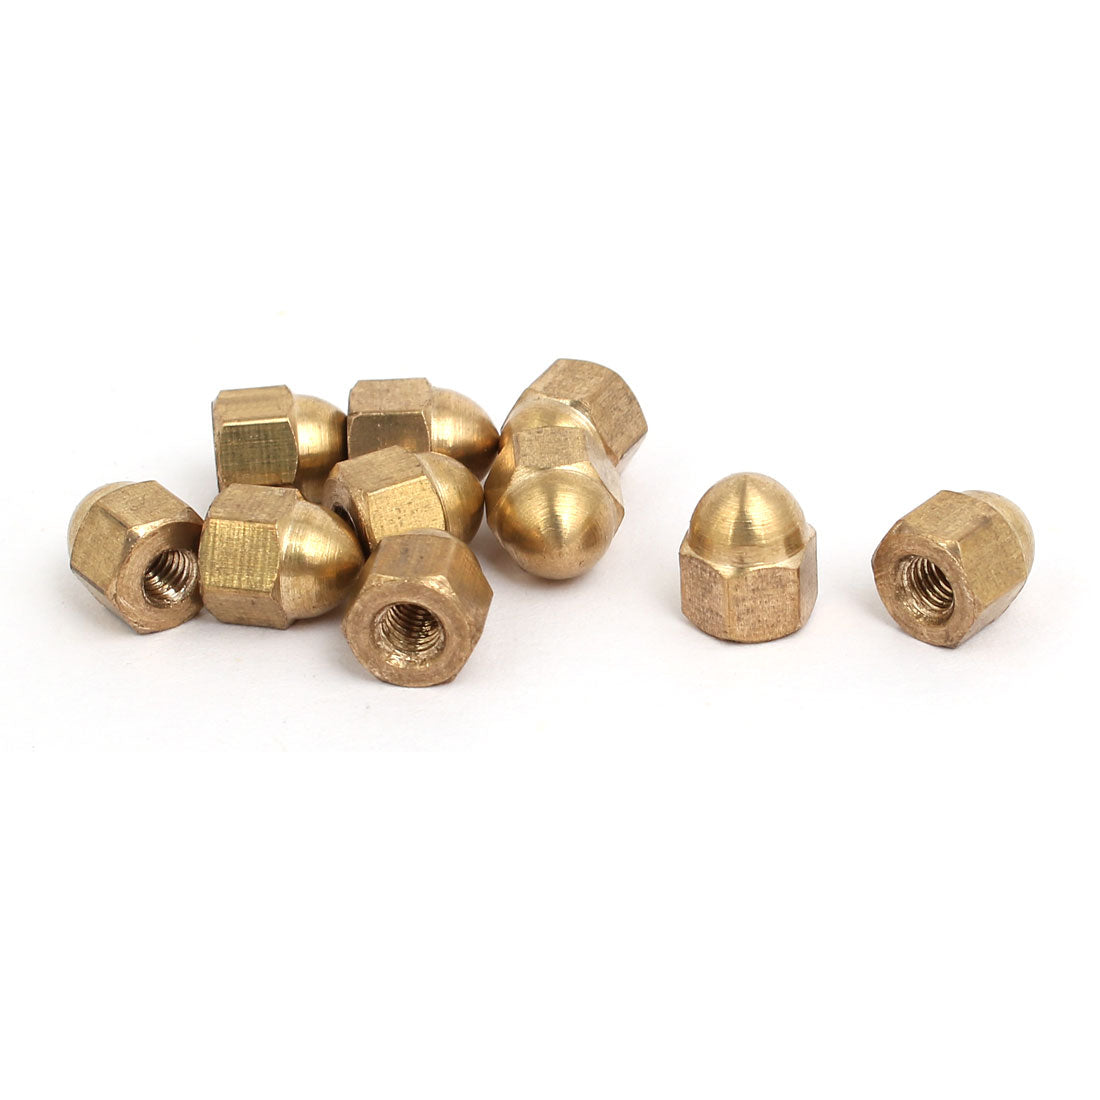 uxcell Uxcell 10pcs M3 Female Thread Nut DIN1587 Dome Cap Head Hex Brass Tone